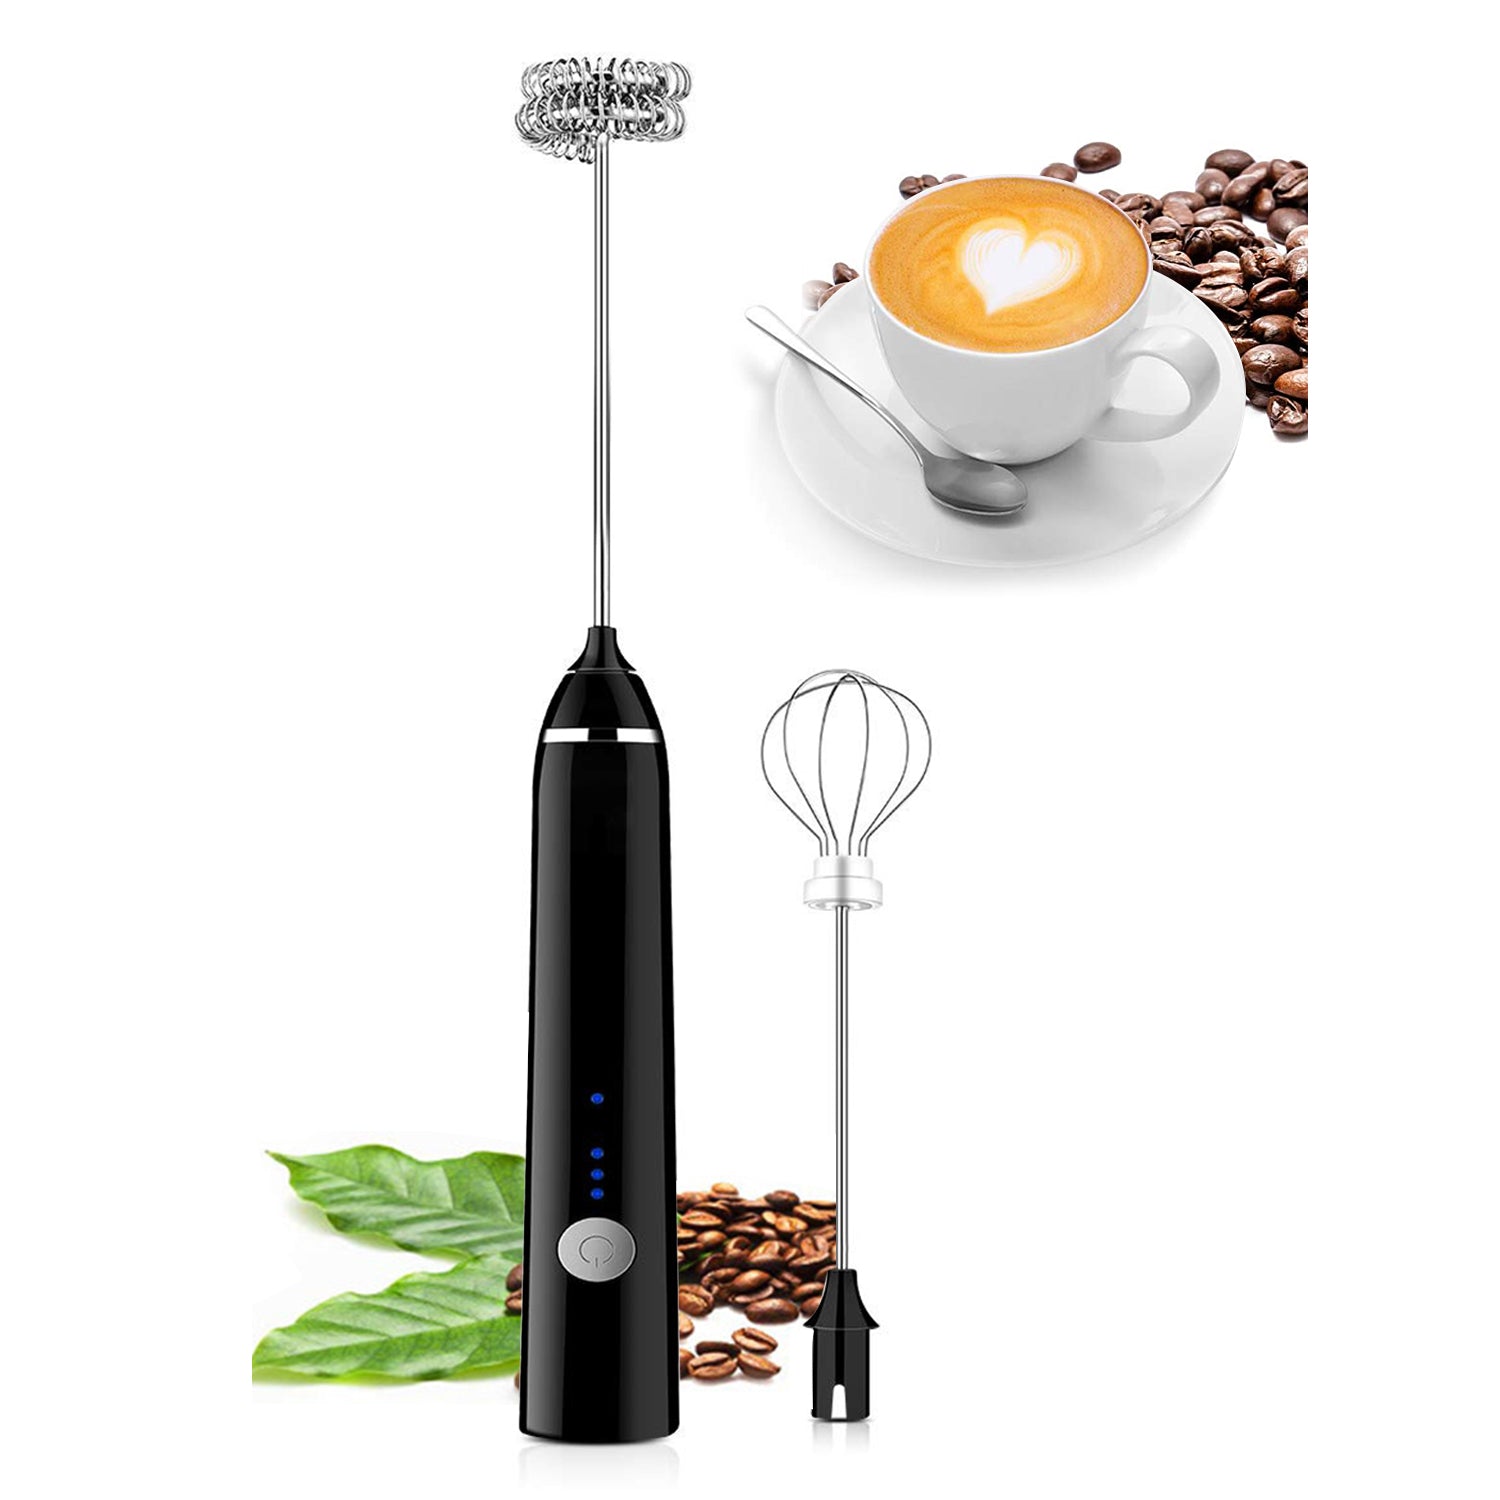 Milk Frother Handheld Foam Maker USB-Rechargeable Drink-Mixer with 2 Stainless Whisks 3-Speed Adjustable Coffee Frother for Cappuccinos, Hot Chocolate